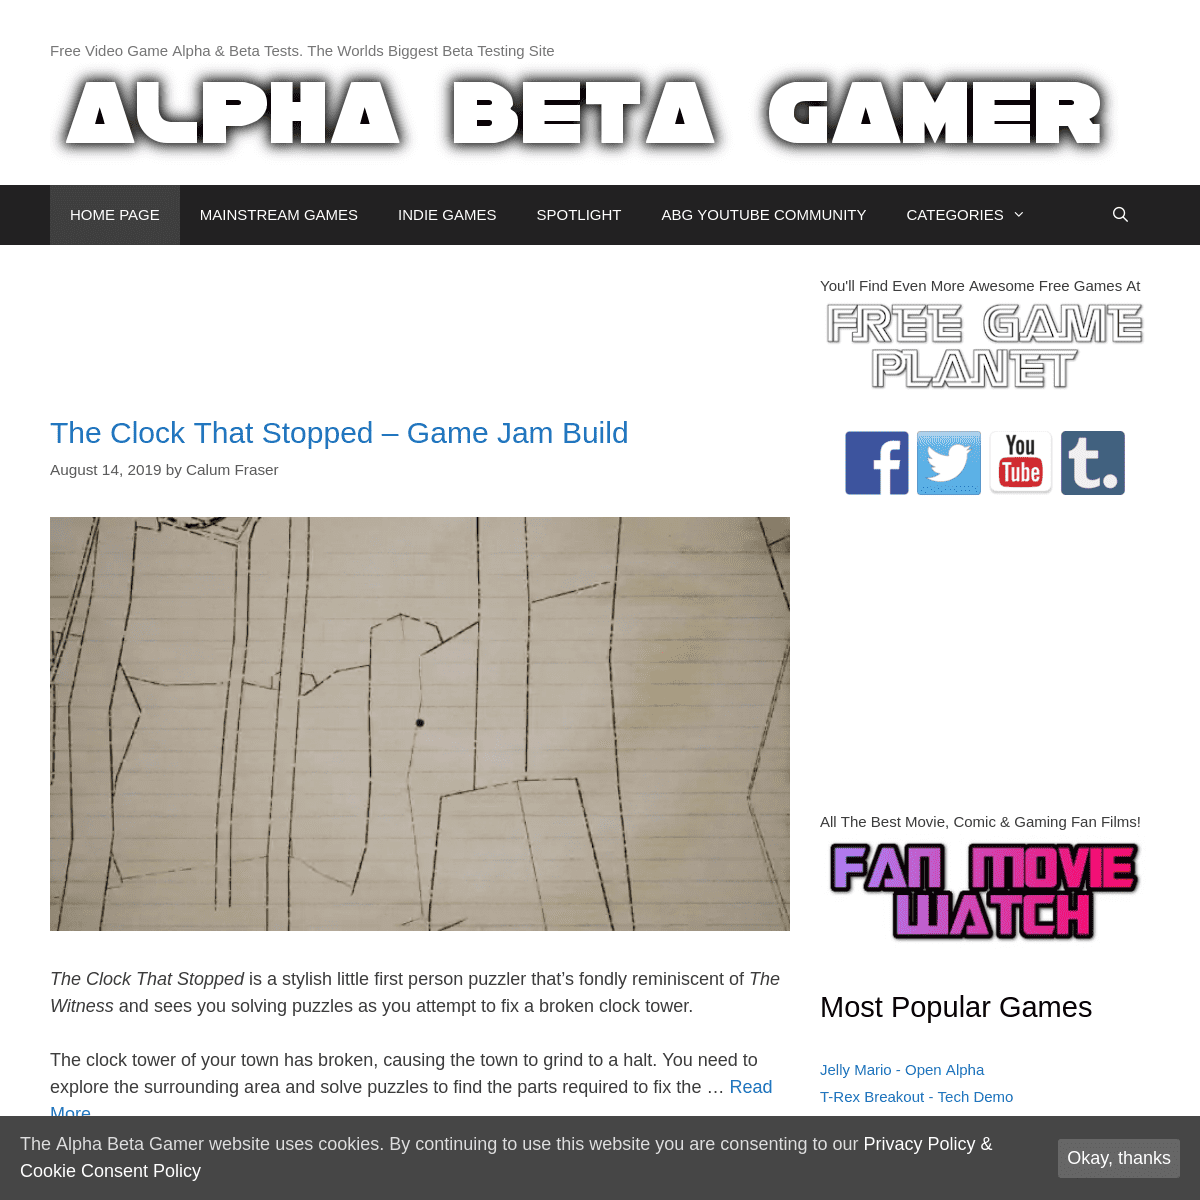 Alpha Beta Gamer - The Free Game Beta Test Archive